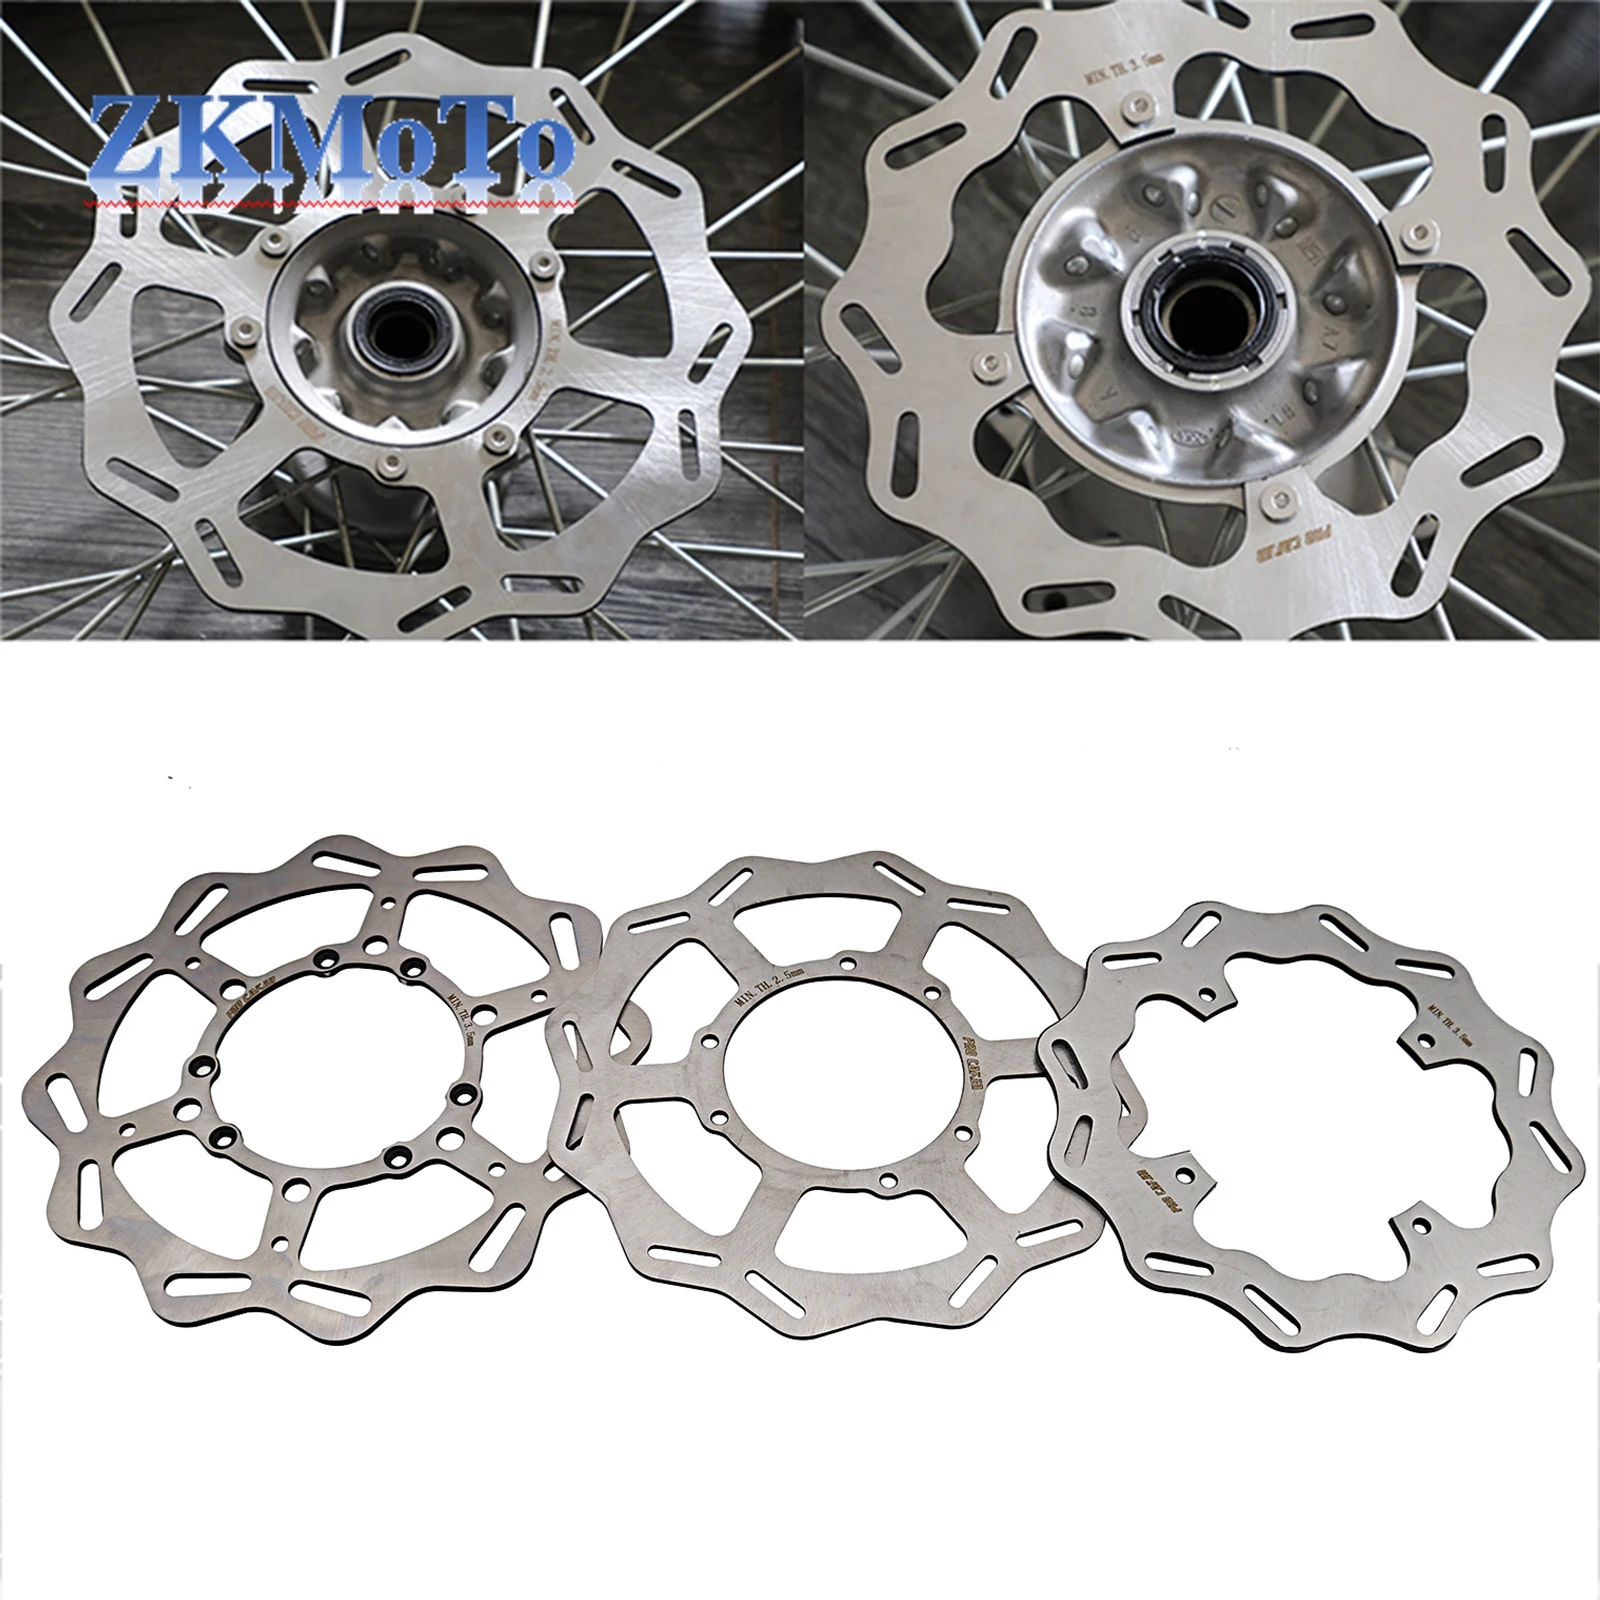 

Motorcycle 240mm 260mm 270mm Front Rear Brake Disc Rotor for Honda CR 125R 125R 250R 250R CRF 250R 450R 250X 450X Universal Part